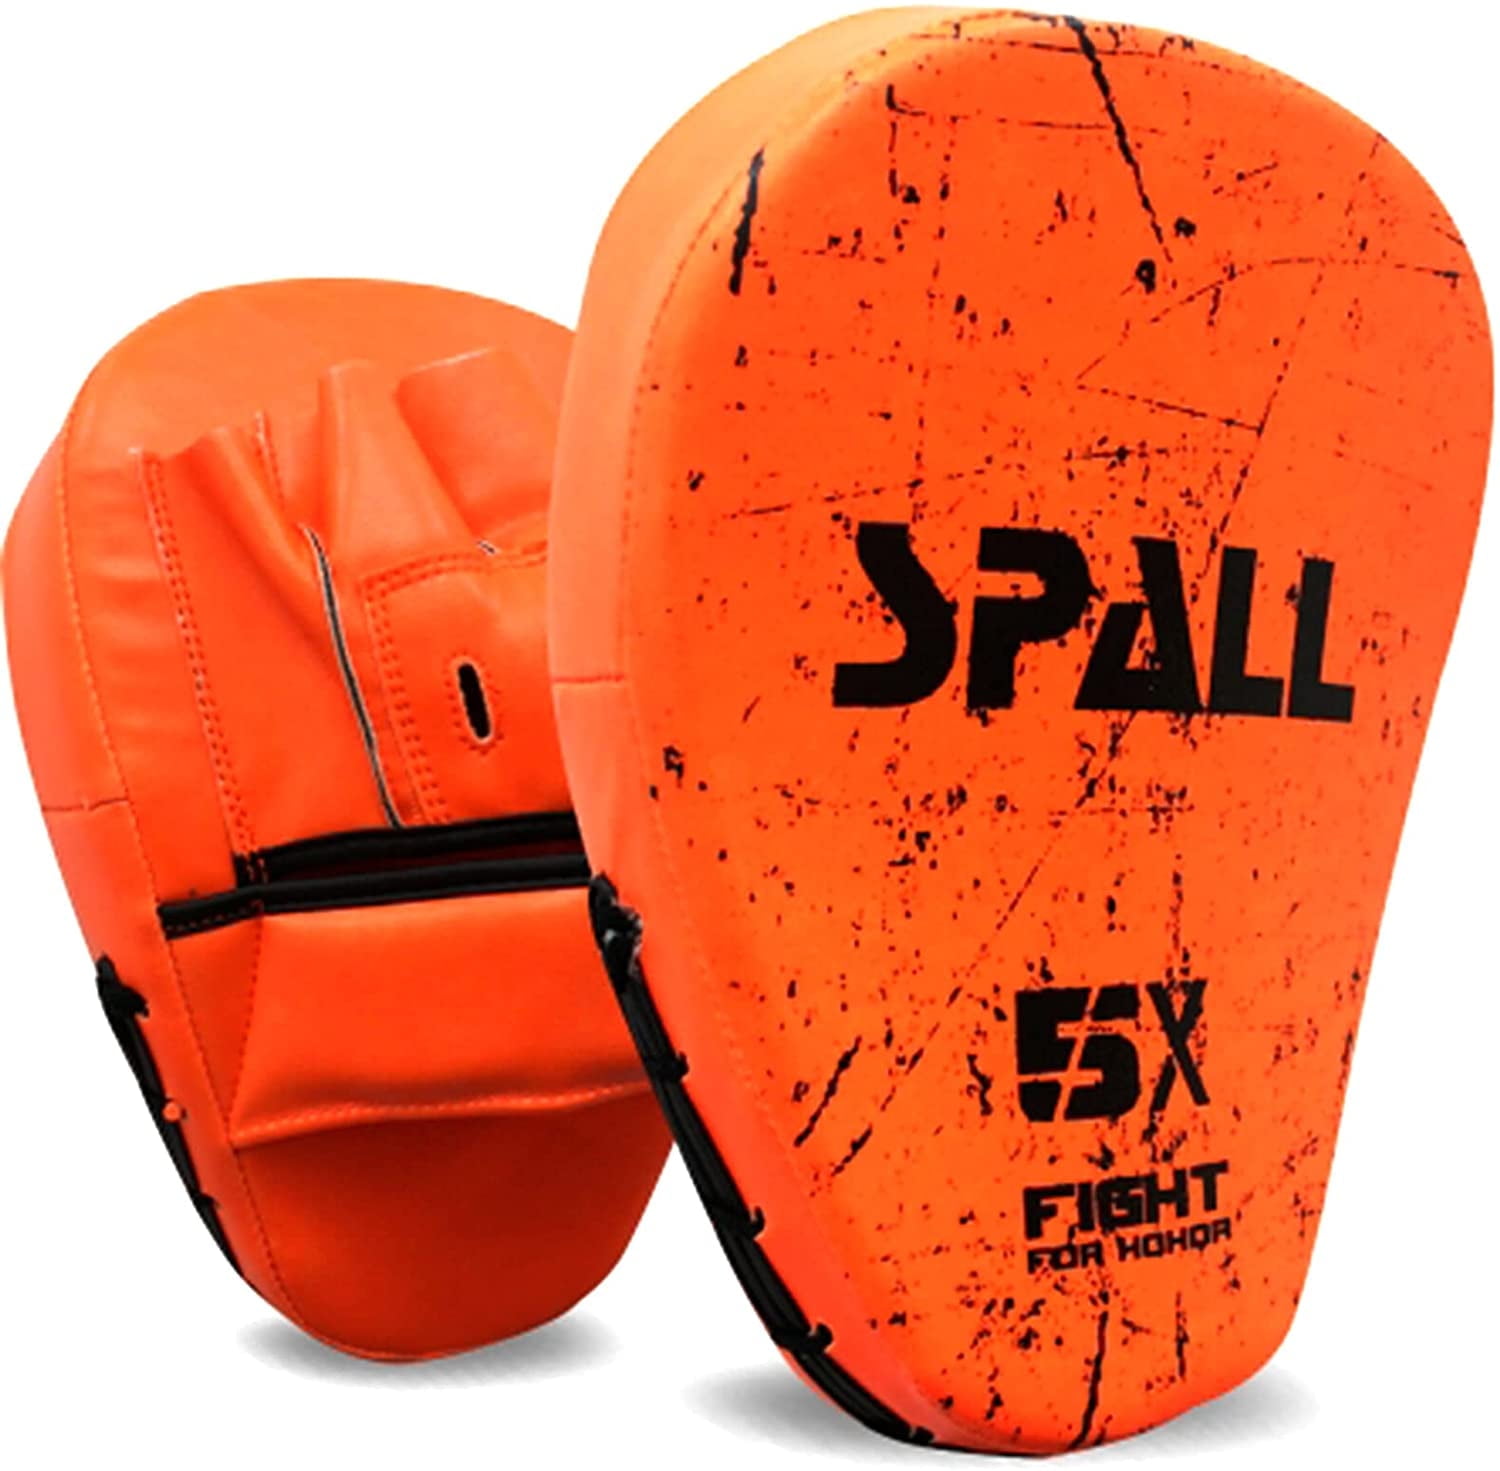 Spall Pro US Curved Boxing Punching Pads - Martial Arts Training ...